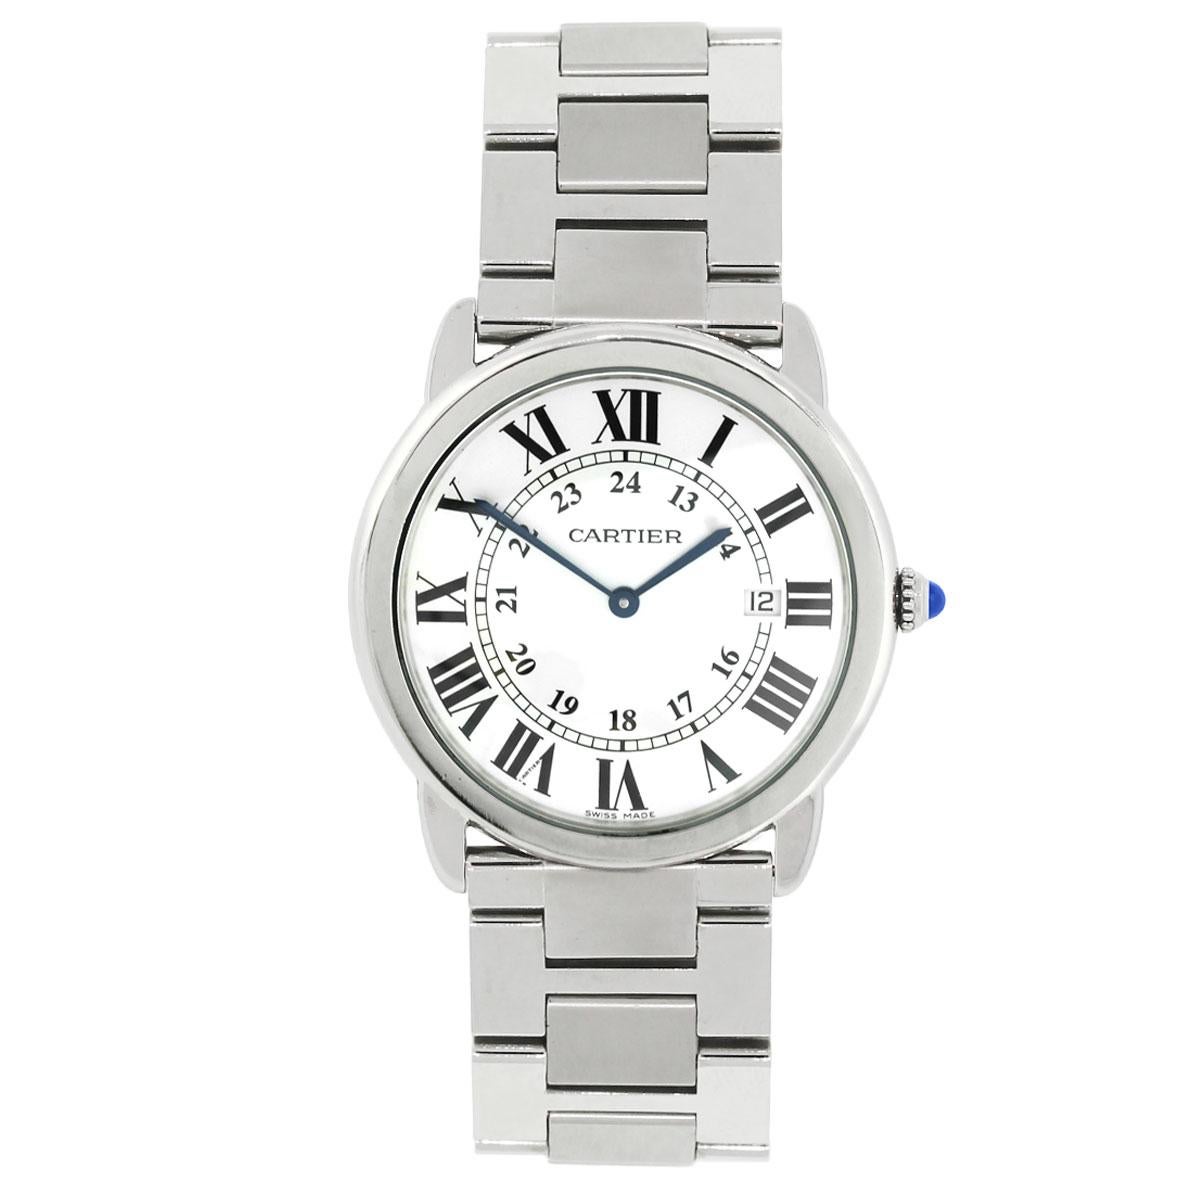 Brand: Cartier
MPN: 3603
Model: Ronde Solo
Case Material: Stainless steel
Case Diameter: 36mm
Crystal: Sapphire crystal
Bezel: Stainless steel
Dial: White roman numeral dial
Bracelet: Stainless steel
Size: Will fit a 6″ wrist 
Clasp: Fold over